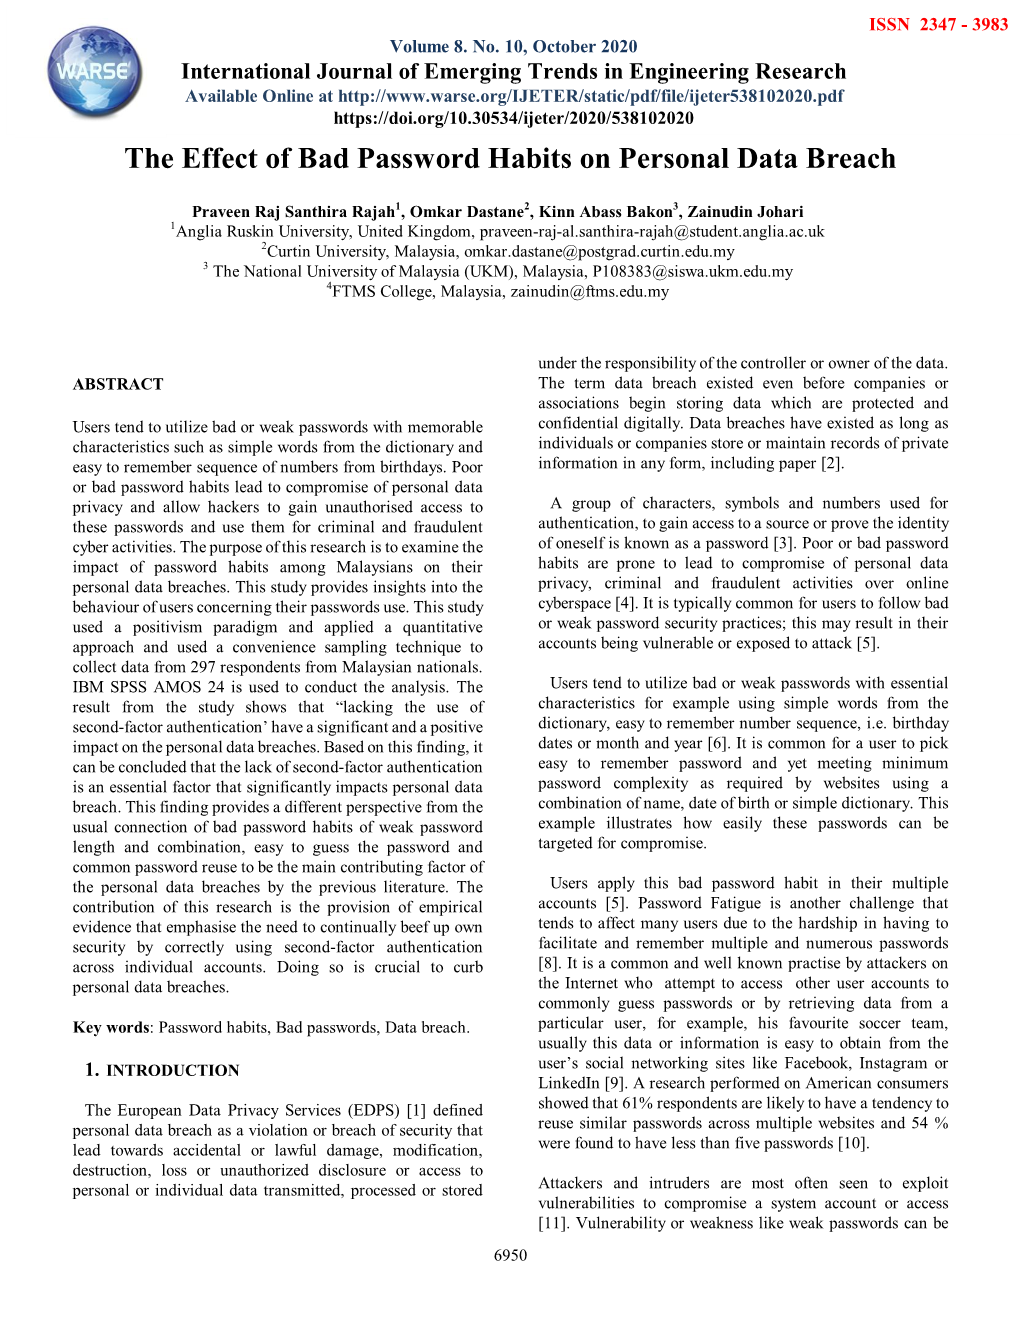 The Effect of Bad Password Habits on Personal Data Breach